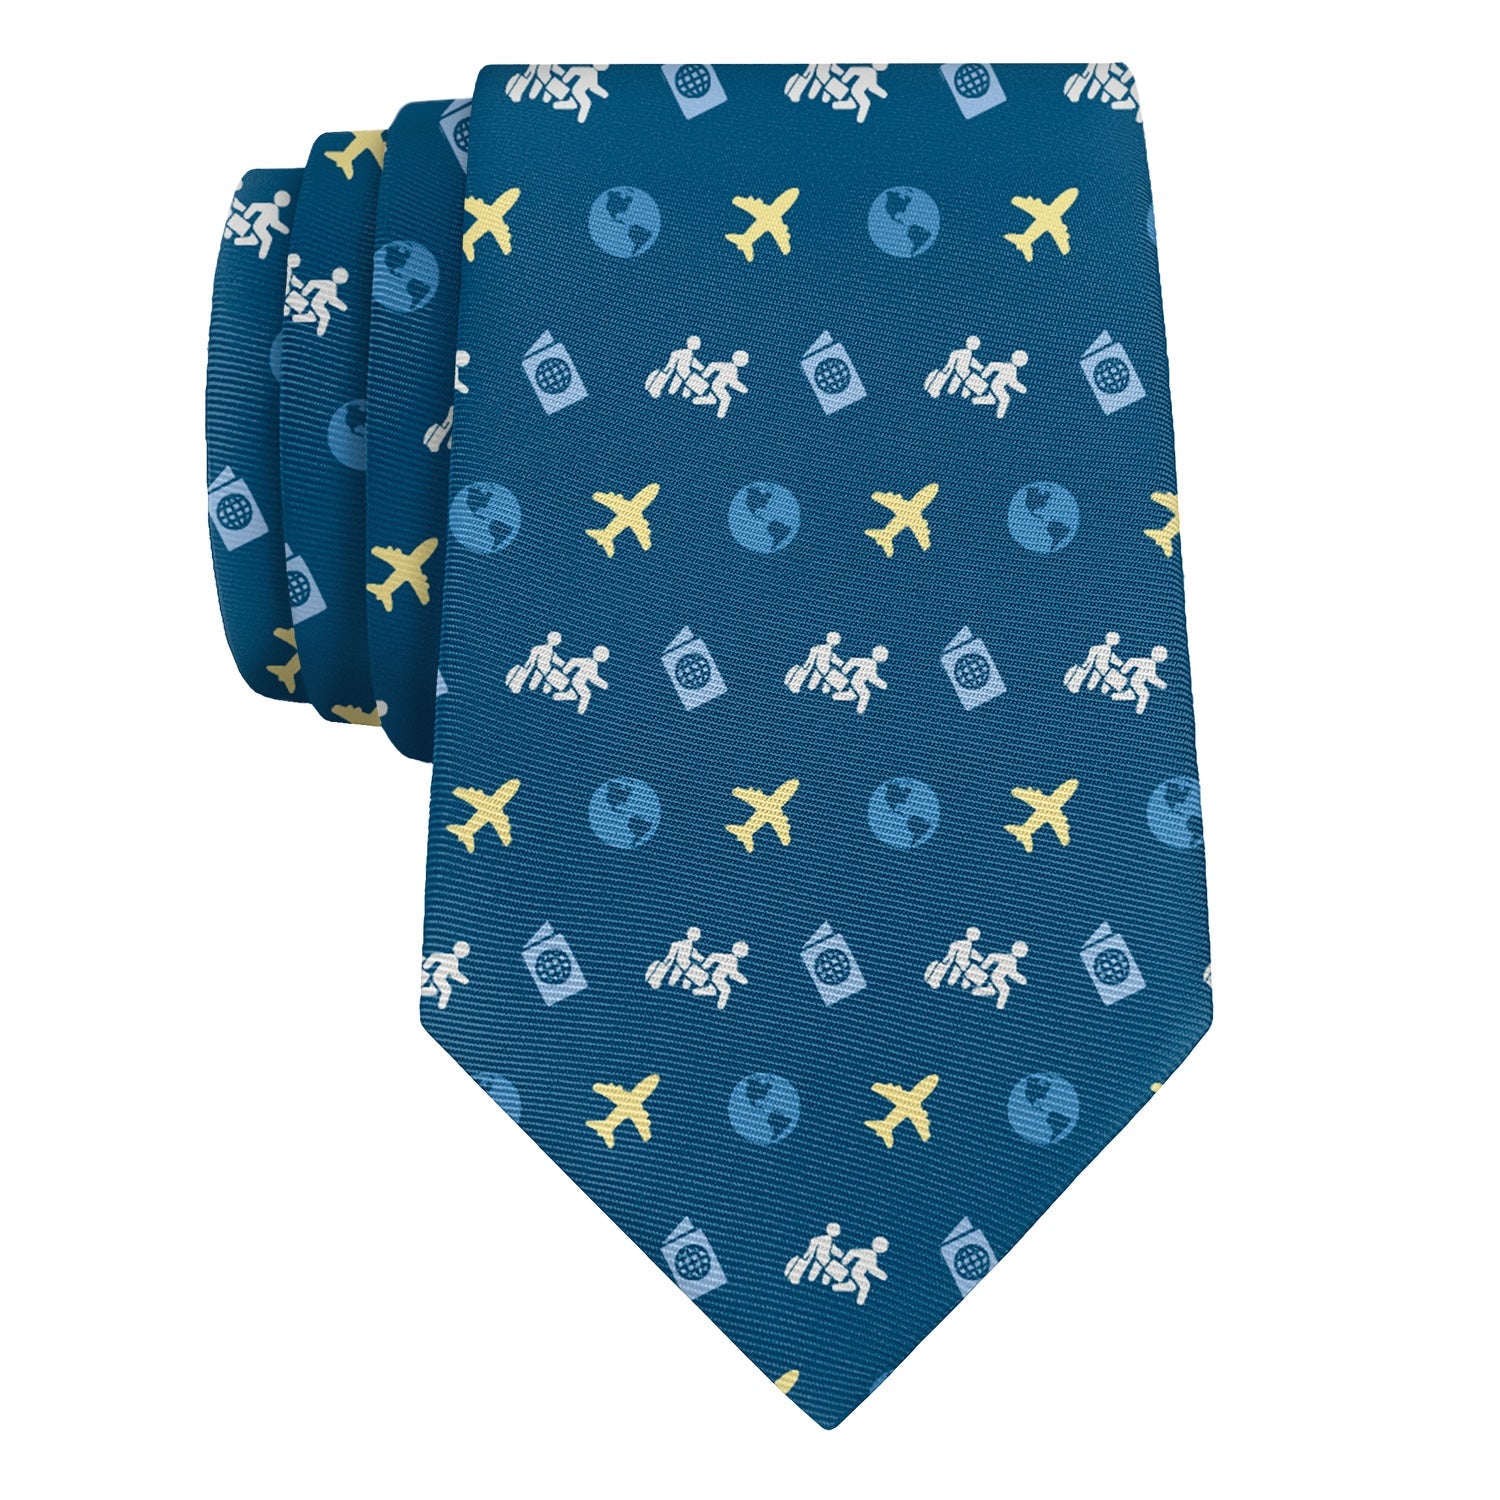 Traveling With Friends Necktie - Knotty 2.75" -  - Knotty Tie Co.